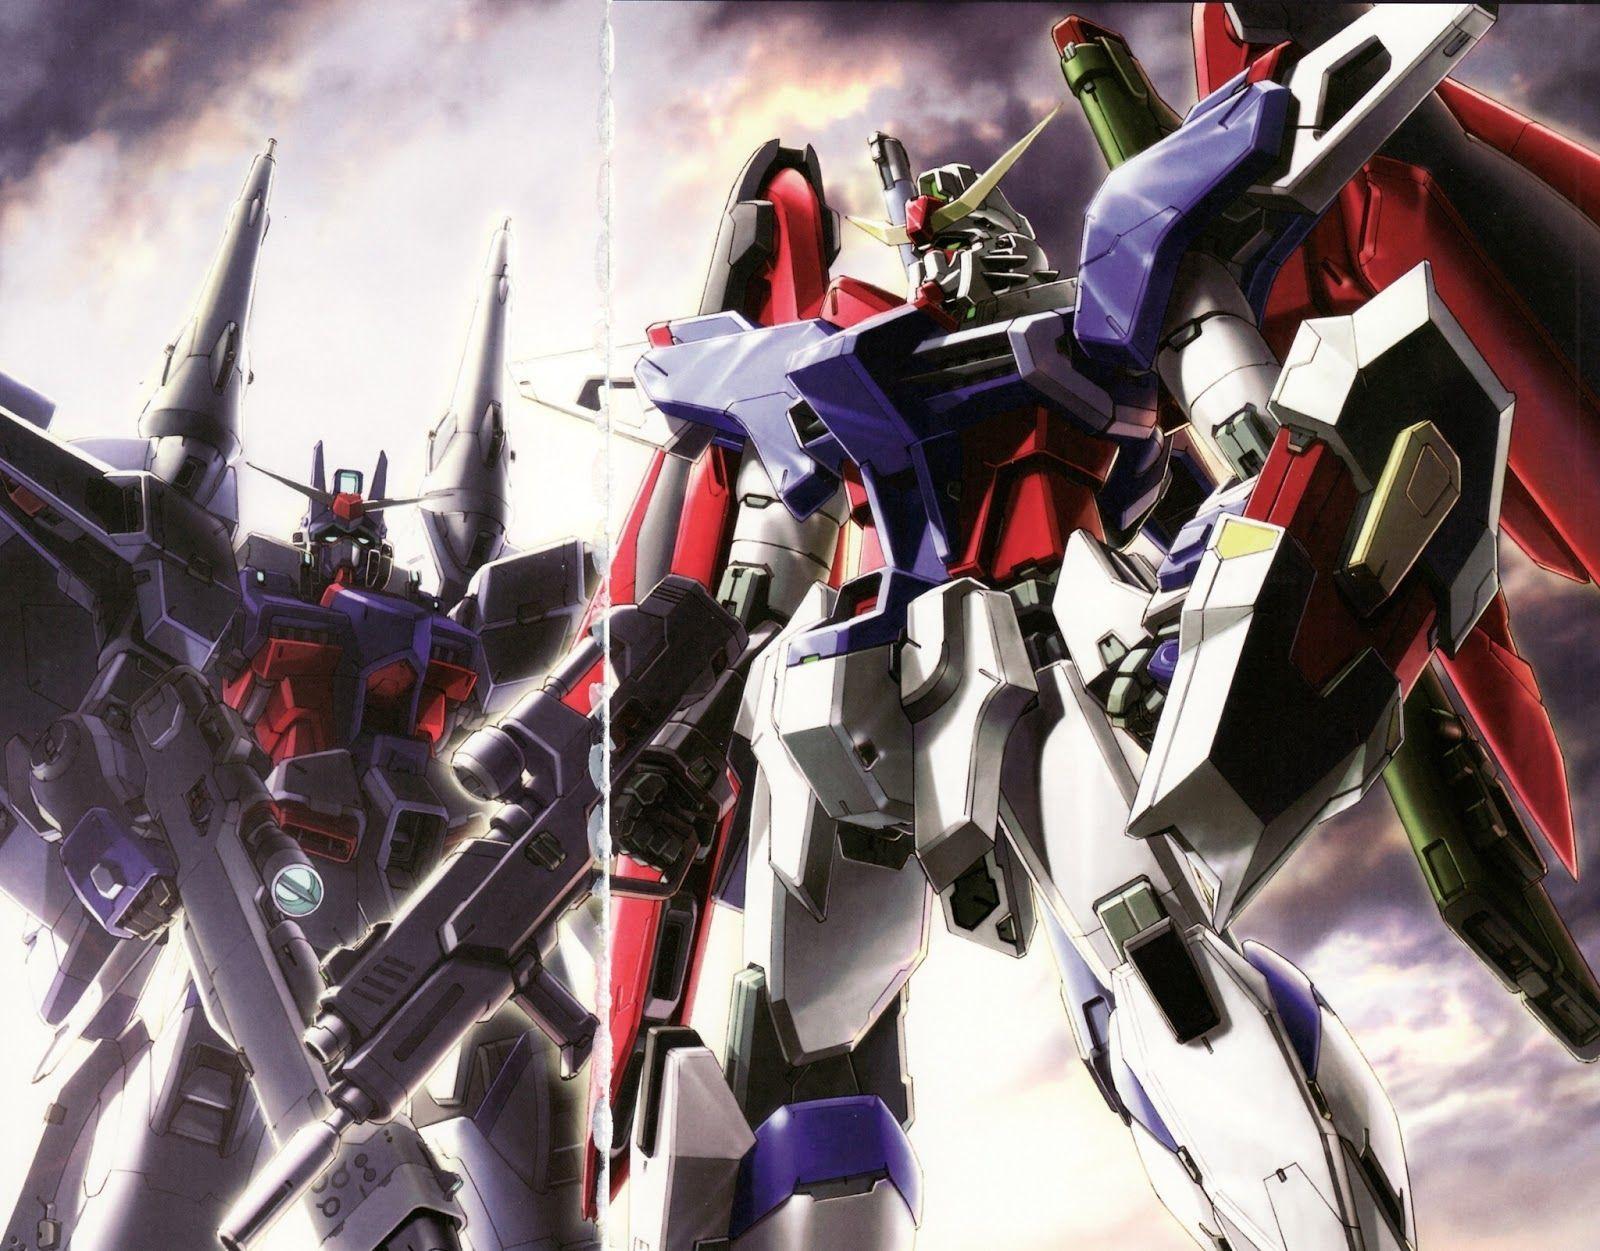 Mobile Suit Gundam SEED Destiny Wallpapers - Wallpaper Cave